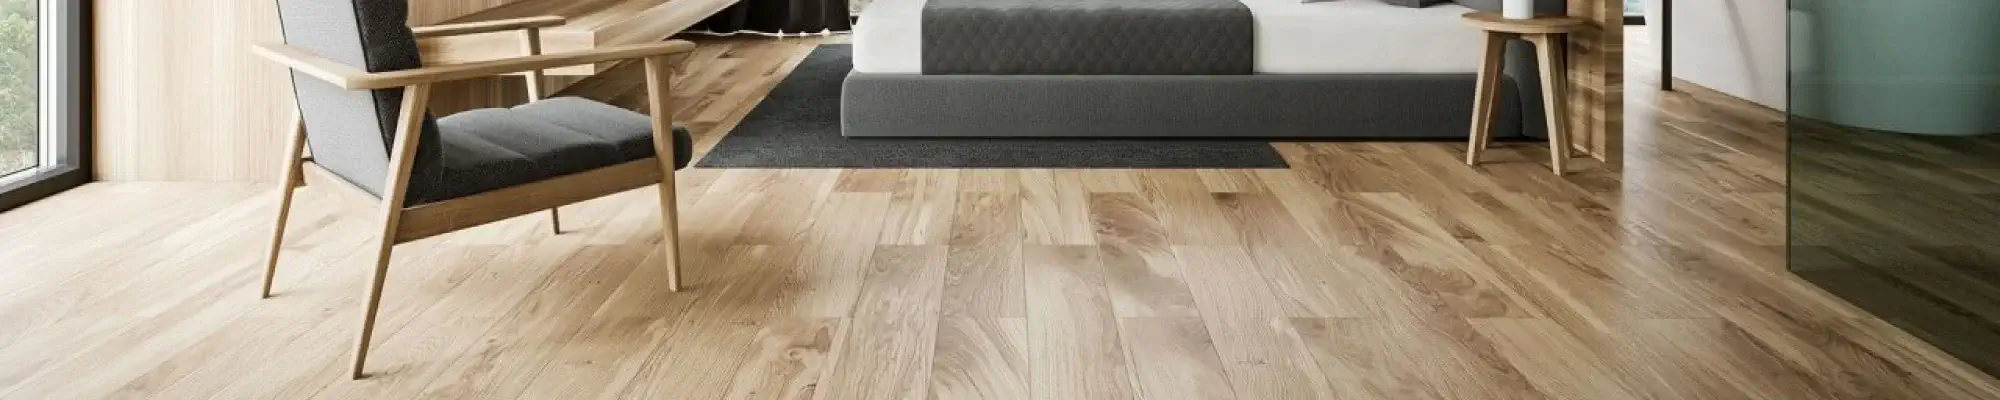 Luxury vinyl information from White's Flooring & Carpet Cleaning in Columbia City, IN